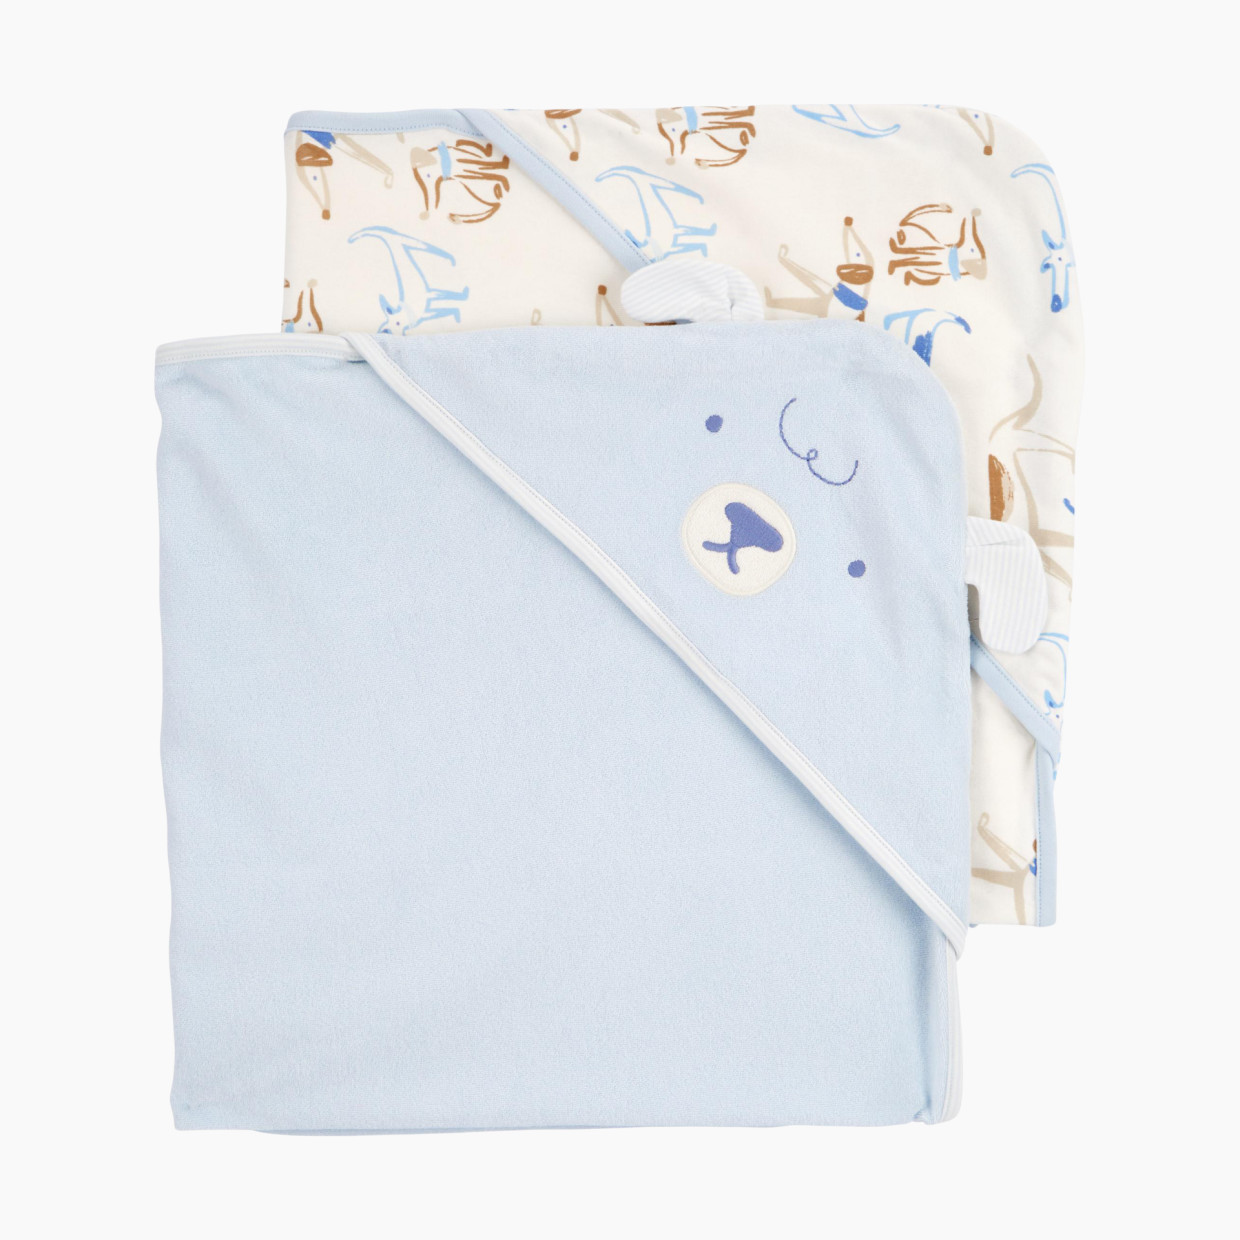 Carter's Hooded Towel (2 Pack) - Blue/Ivory, O/S.